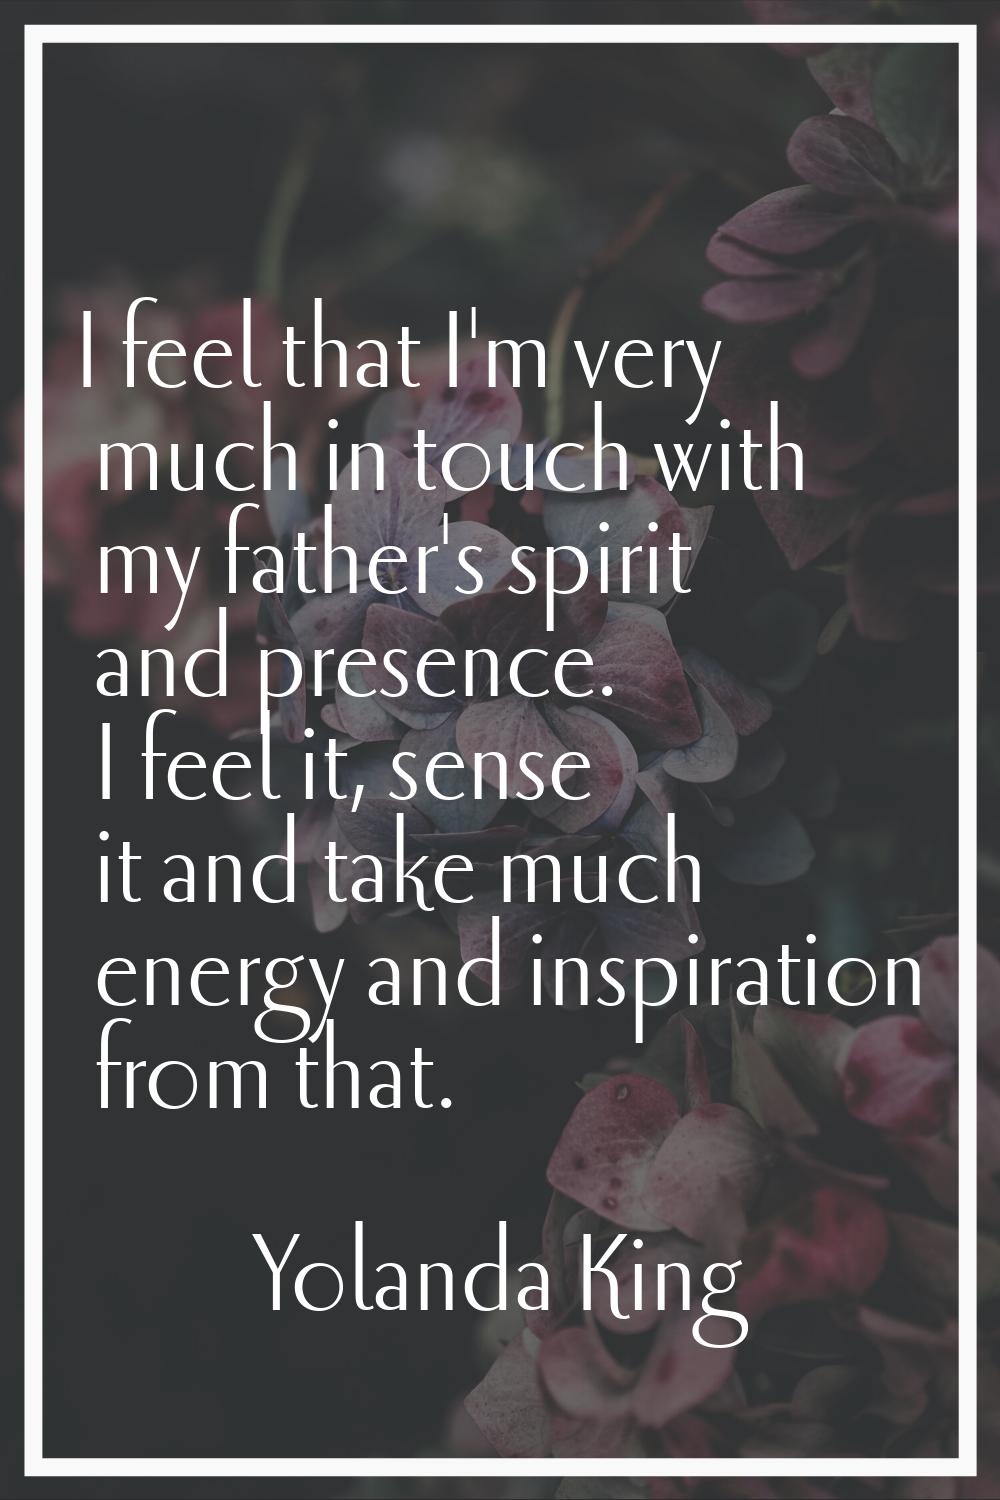 I feel that I'm very much in touch with my father's spirit and presence. I feel it, sense it and ta